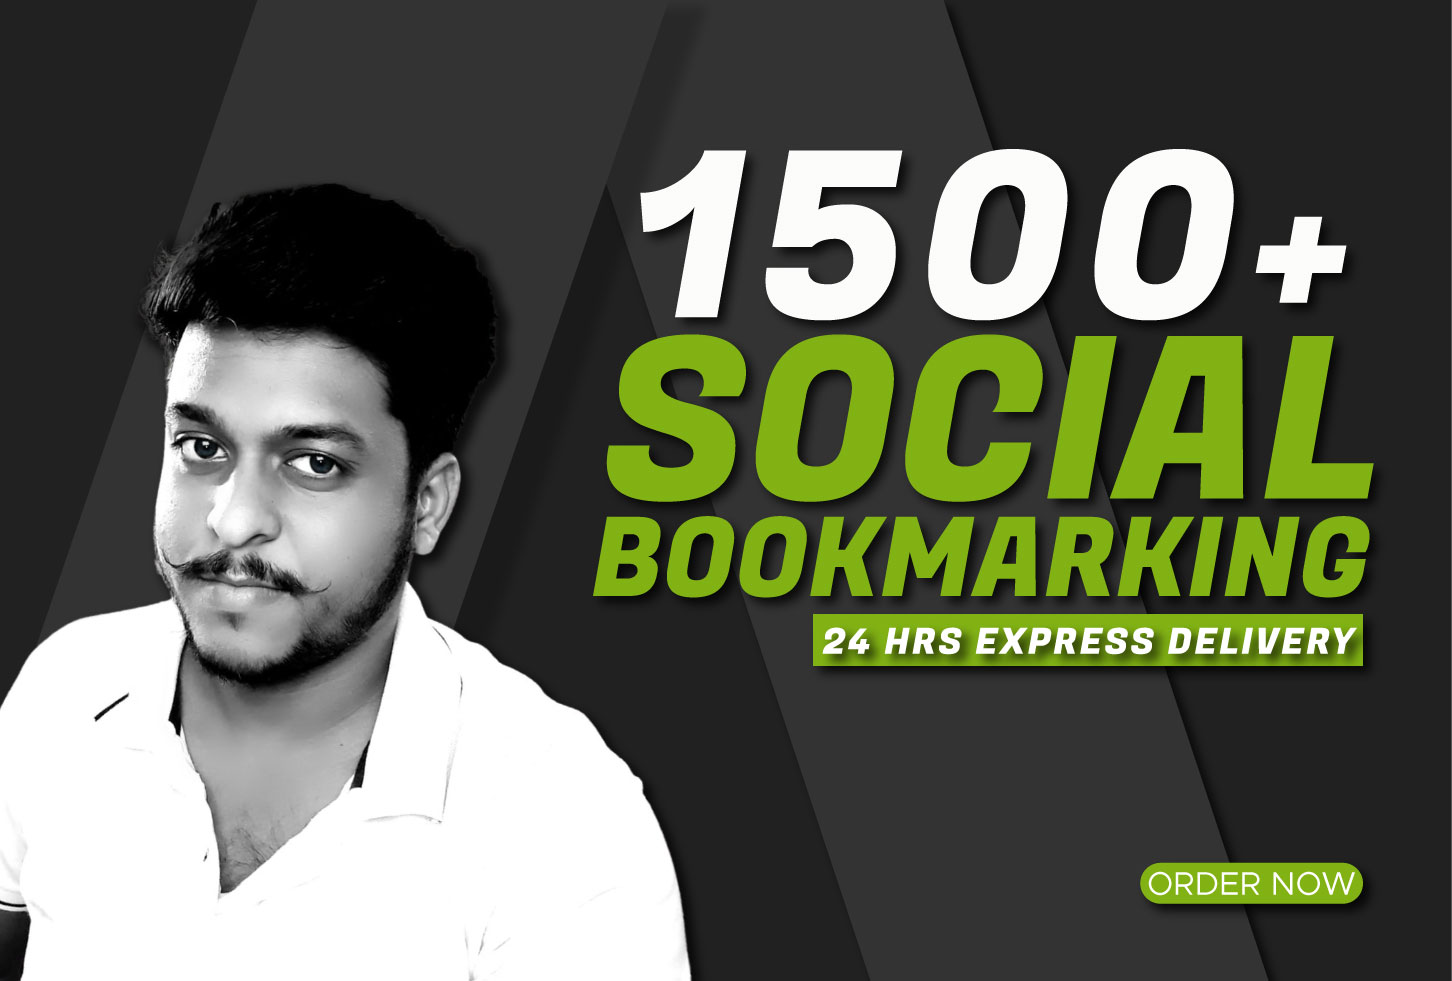 Instant 1500+ Live Social Bookmarking Links within 24 hours